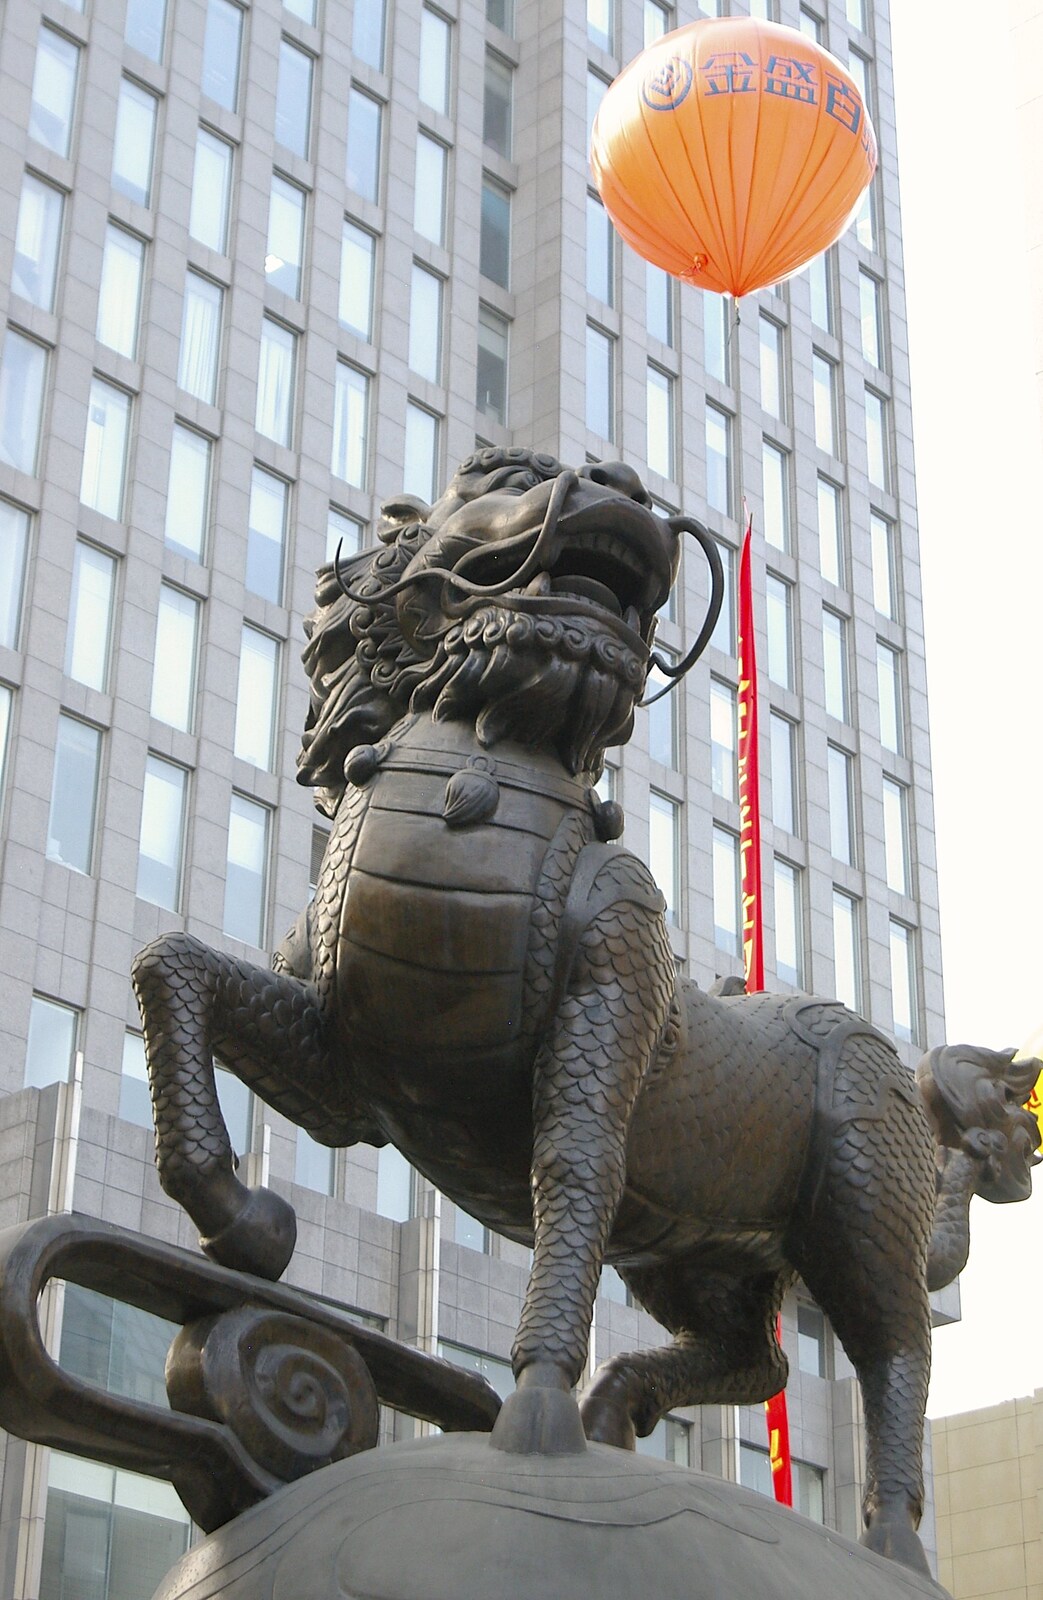 A Chinese dragon statue, outside a bank from A Few Days in Nanjing, Jiangsu Province, China - 7th October 2006